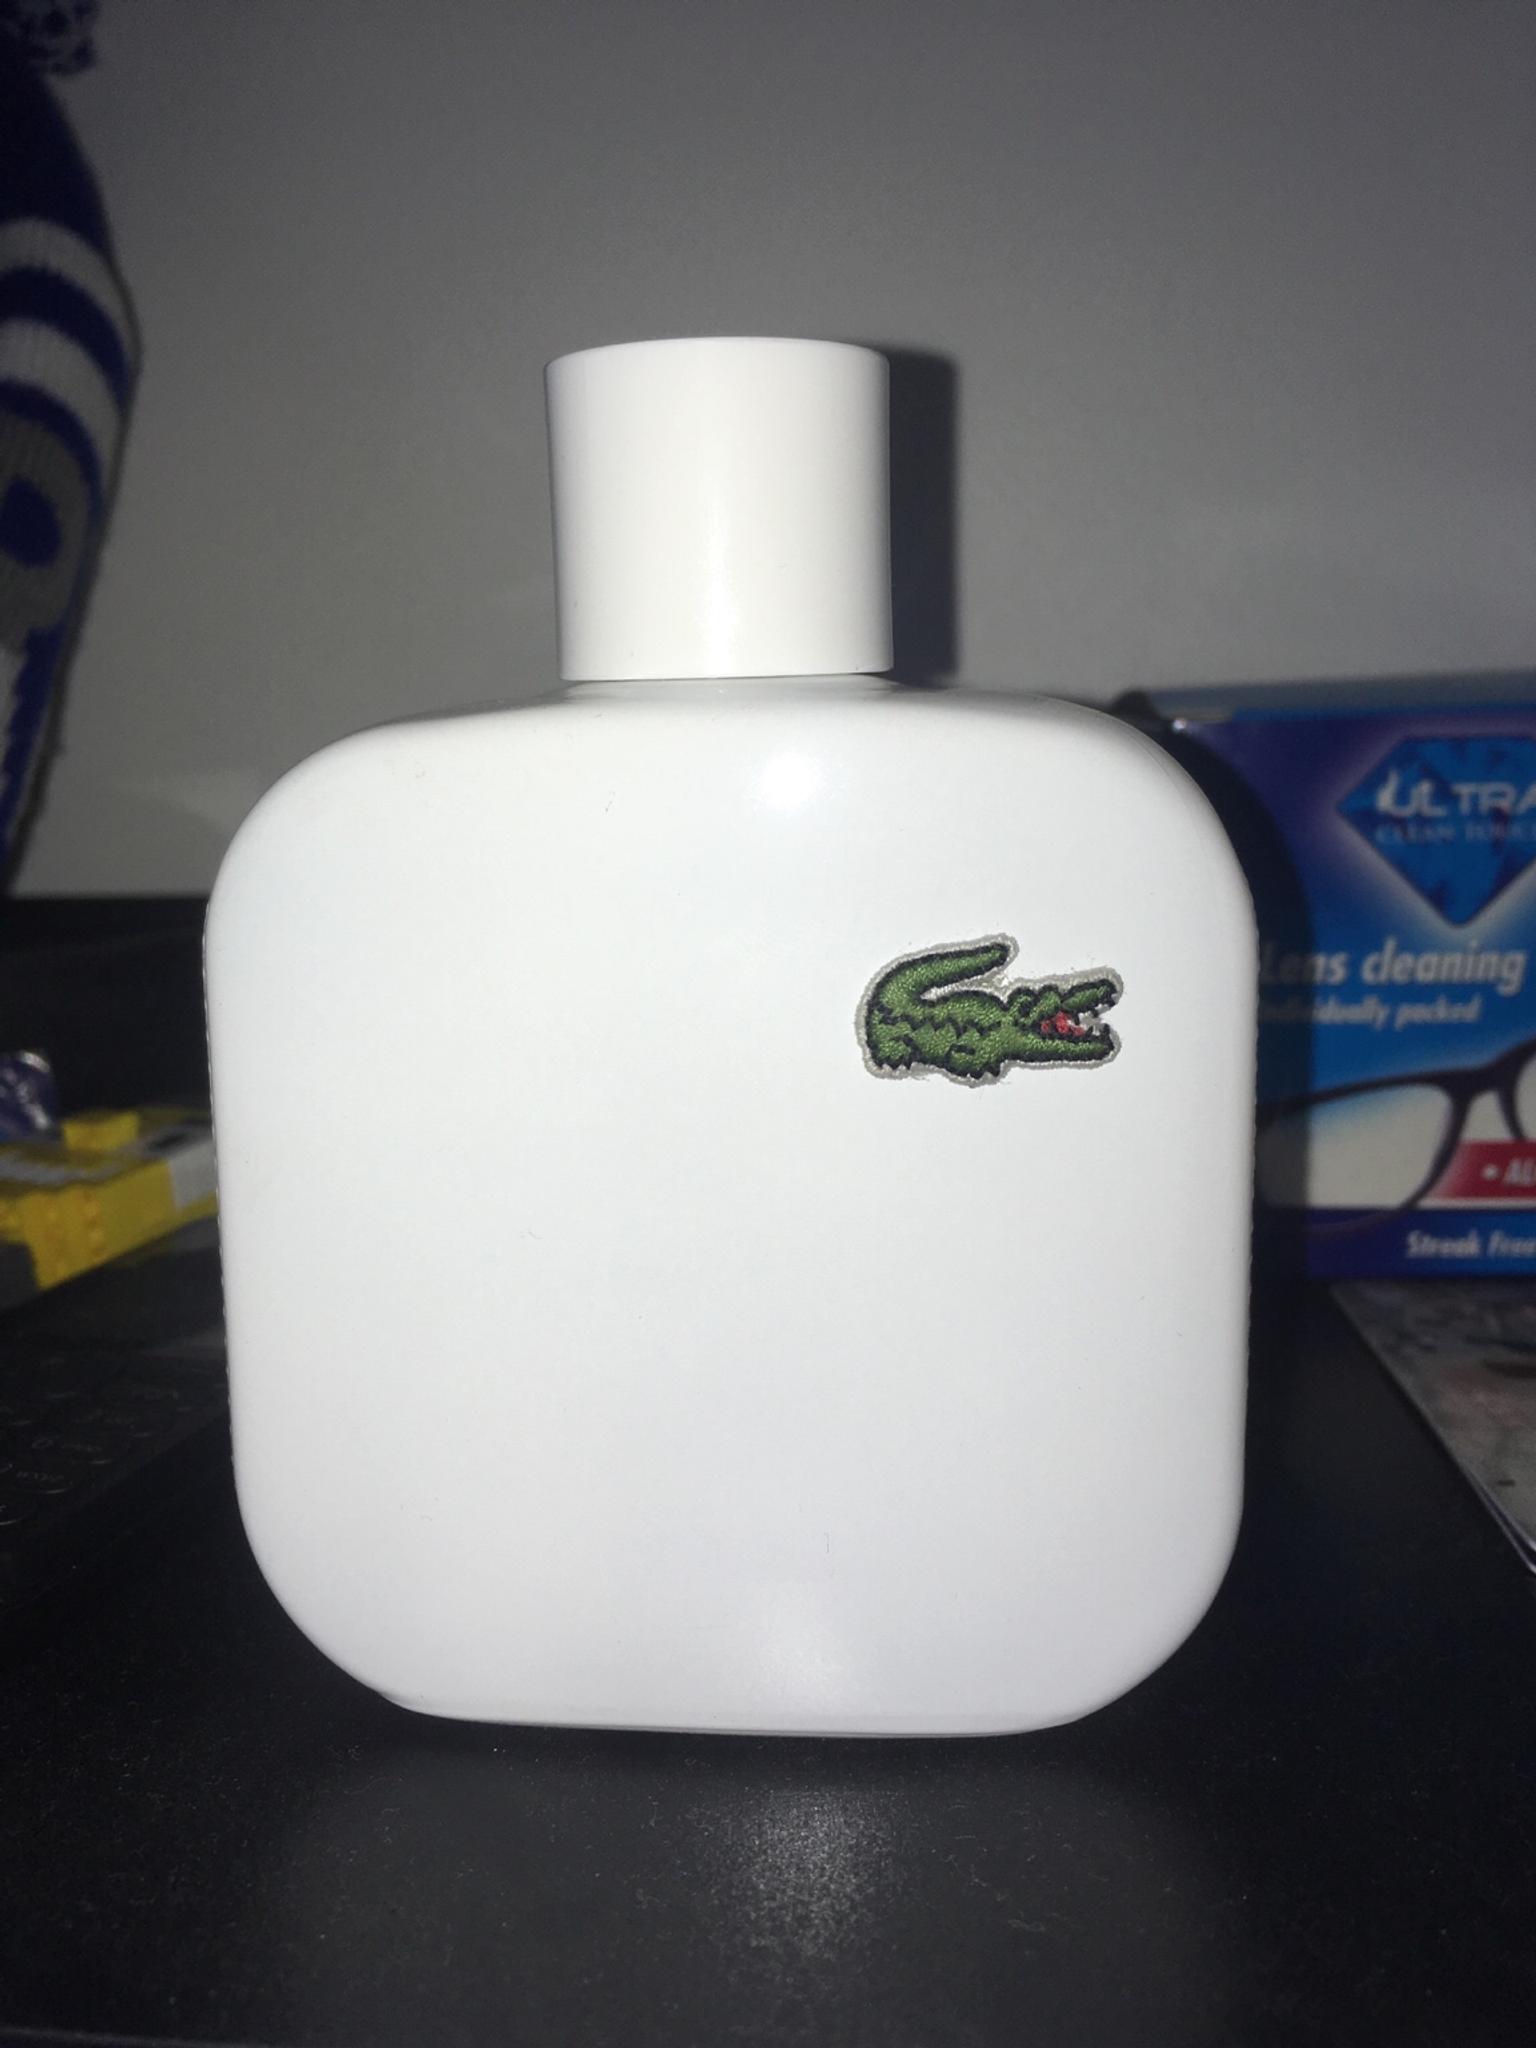 lacoste aftershave